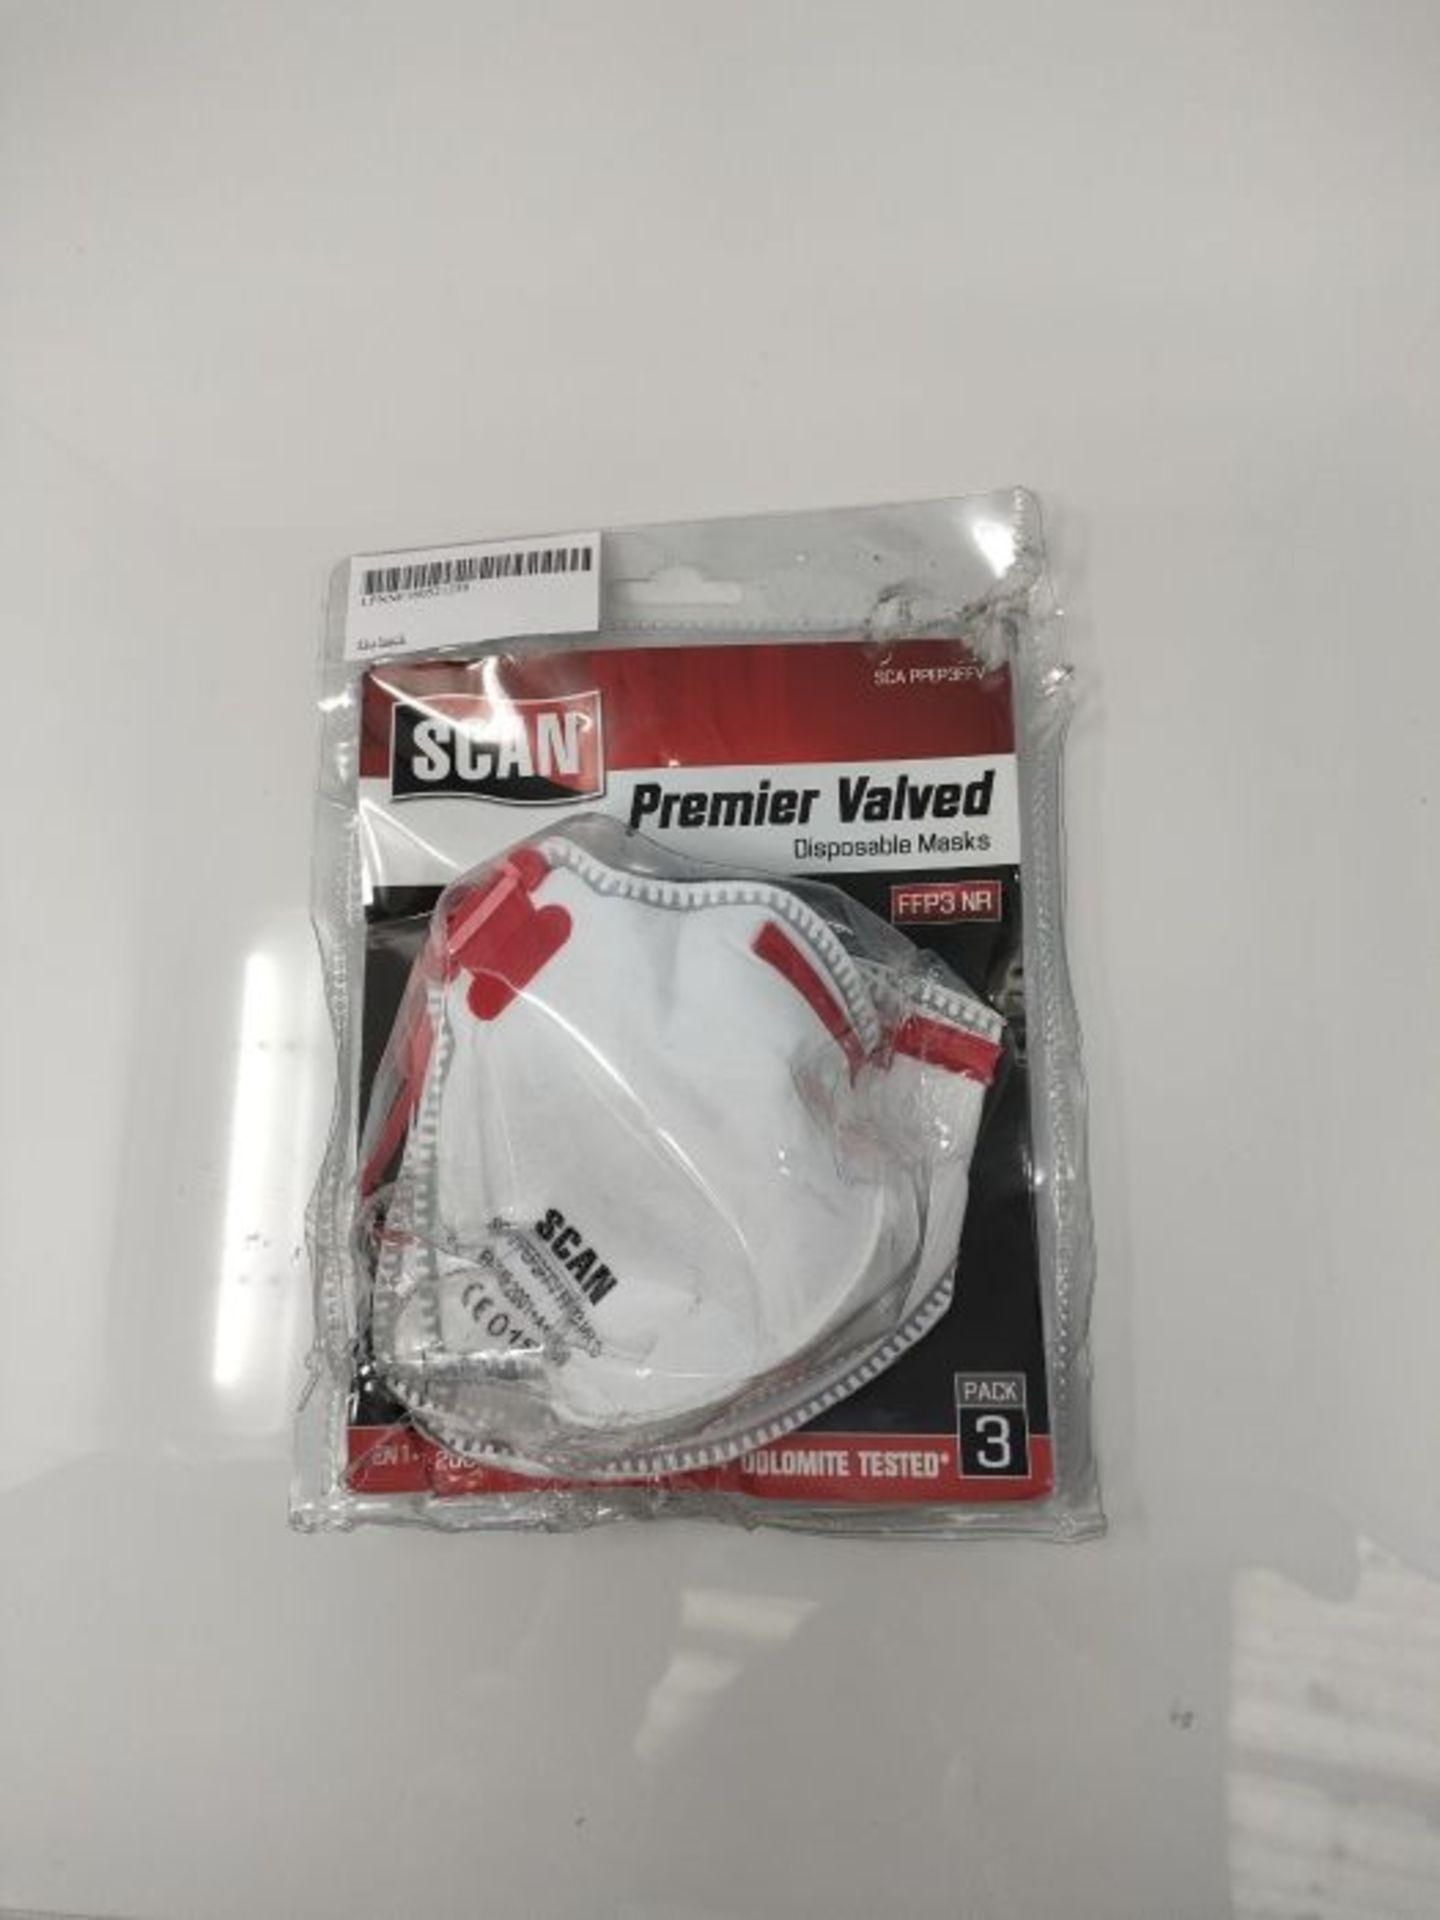 Scan PPEP3FFV FFP3 ProtectionFold Flat Disposable Valved Disposable Mask (Pack of 3) - Image 2 of 3